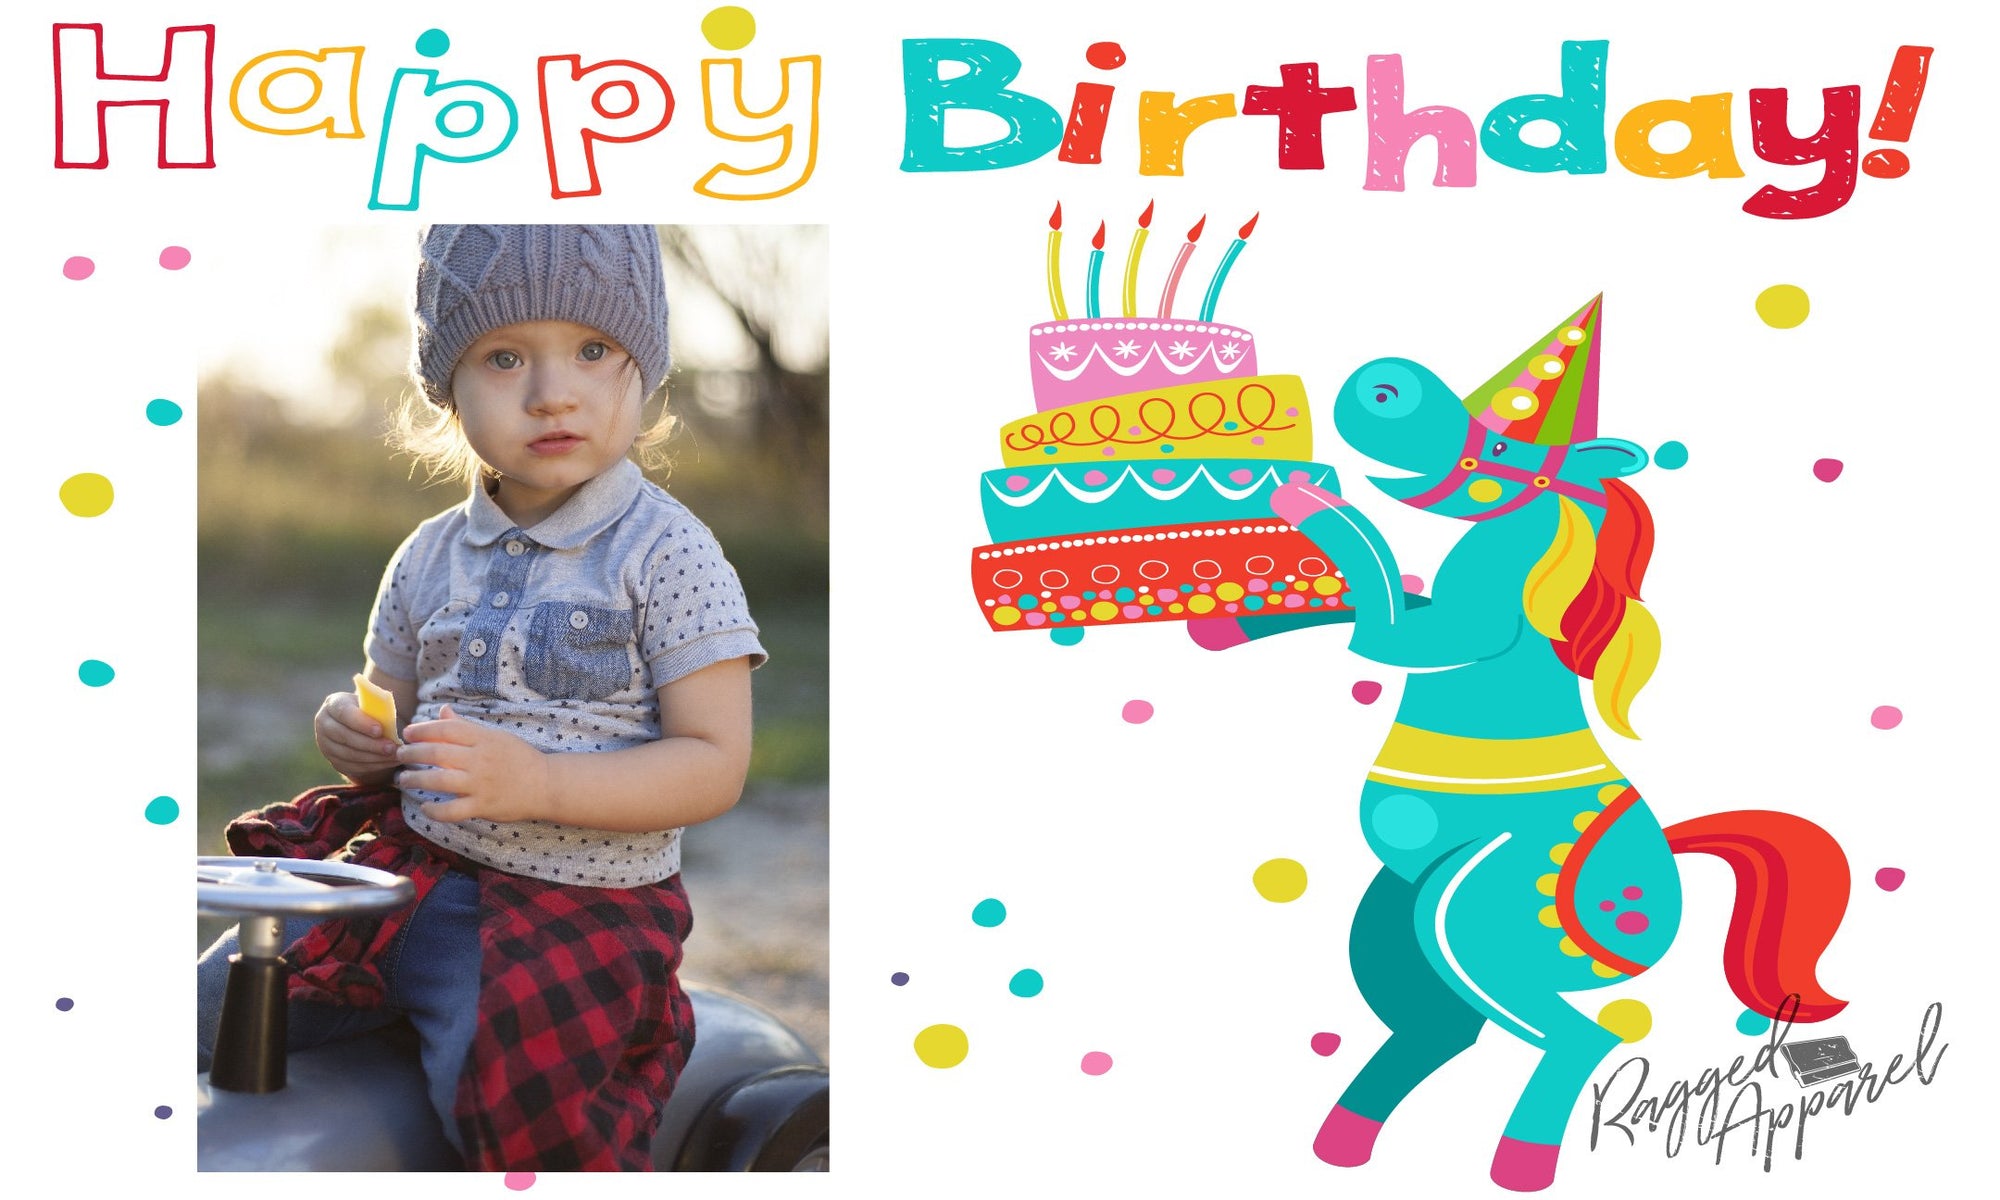 Kids Photo Birthday Banner With Horse - Ragged Apparel Screen Printing and Signs - www.nmshirts.com